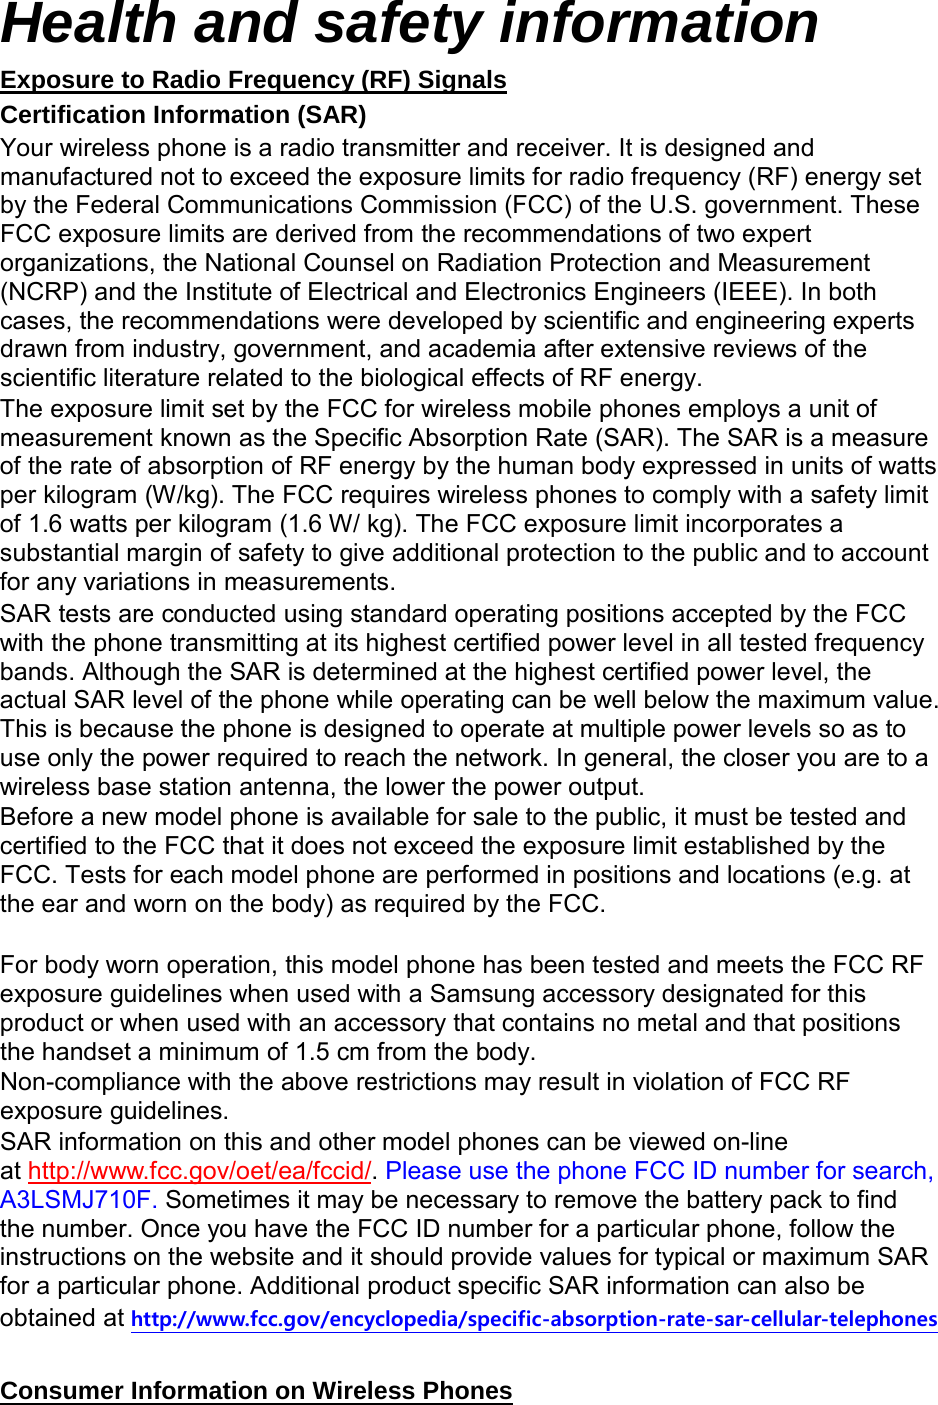 Health and safety information Certification Information (SAR) Exposure to Radio Frequency (RF) Signals Your wireless phone is a radio transmitter and receiver. It is designed and manufactured not to exceed the exposure limits for radio frequency (RF) energy set by the Federal Communications Commission (FCC) of the U.S. government. These FCC exposure limits are derived from the recommendations of two expert organizations, the National Counsel on Radiation Protection and Measurement (NCRP) and the Institute of Electrical and Electronics Engineers (IEEE). In both cases, the recommendations were developed by scientific and engineering experts drawn from industry, government, and academia after extensive reviews of the scientific literature related to the biological effects of RF energy. The exposure limit set by the FCC for wireless mobile phones employs a unit of measurement known as the Specific Absorption Rate (SAR). The SAR is a measure of the rate of absorption of RF energy by the human body expressed in units of watts per kilogram (W/kg). The FCC requires wireless phones to comply with a safety limit of 1.6 watts per kilogram (1.6 W/ kg). The FCC exposure limit incorporates a substantial margin of safety to give additional protection to the public and to account for any variations in measurements. SAR tests are conducted using standard operating positions accepted by the FCC with the phone transmitting at its highest certified power level in all tested frequency bands. Although the SAR is determined at the highest certified power level, the actual SAR level of the phone while operating can be well below the maximum value. This is because the phone is designed to operate at multiple power levels so as to use only the power required to reach the network. In general, the closer you are to a wireless base station antenna, the lower the power output. Before a new model phone is available for sale to the public, it must be tested and certified to the FCC that it does not exceed the exposure limit established by the FCC. Tests for each model phone are performed in positions and locations (e.g. at the ear and worn on the body) as required by the FCC.      For body worn operation, this model phone has been tested and meets the FCC RF exposure guidelines when used with a Samsung accessory designated for this product or when used with an accessory that contains no metal and that positions the handset a minimum of 1.5 cm from the body.   Non-compliance with the above restrictions may result in violation of FCC RF exposure guidelines. SAR information on this and other model phones can be viewed on-line at http://www.fcc.gov/oet/ea/fccid/. Please use the phone FCC ID number for search, A3LSMJ710F. Sometimes it may be necessary to remove the battery pack to find the number. Once you have the FCC ID number for a particular phone, follow the instructions on the website and it should provide values for typical or maximum SAR for a particular phone. Additional product specific SAR information can also be obtained at http://www.fcc.gov/encyclopedia/specific-absorption-rate-sar-cellular-telephones  Consumer Information on Wireless Phones 